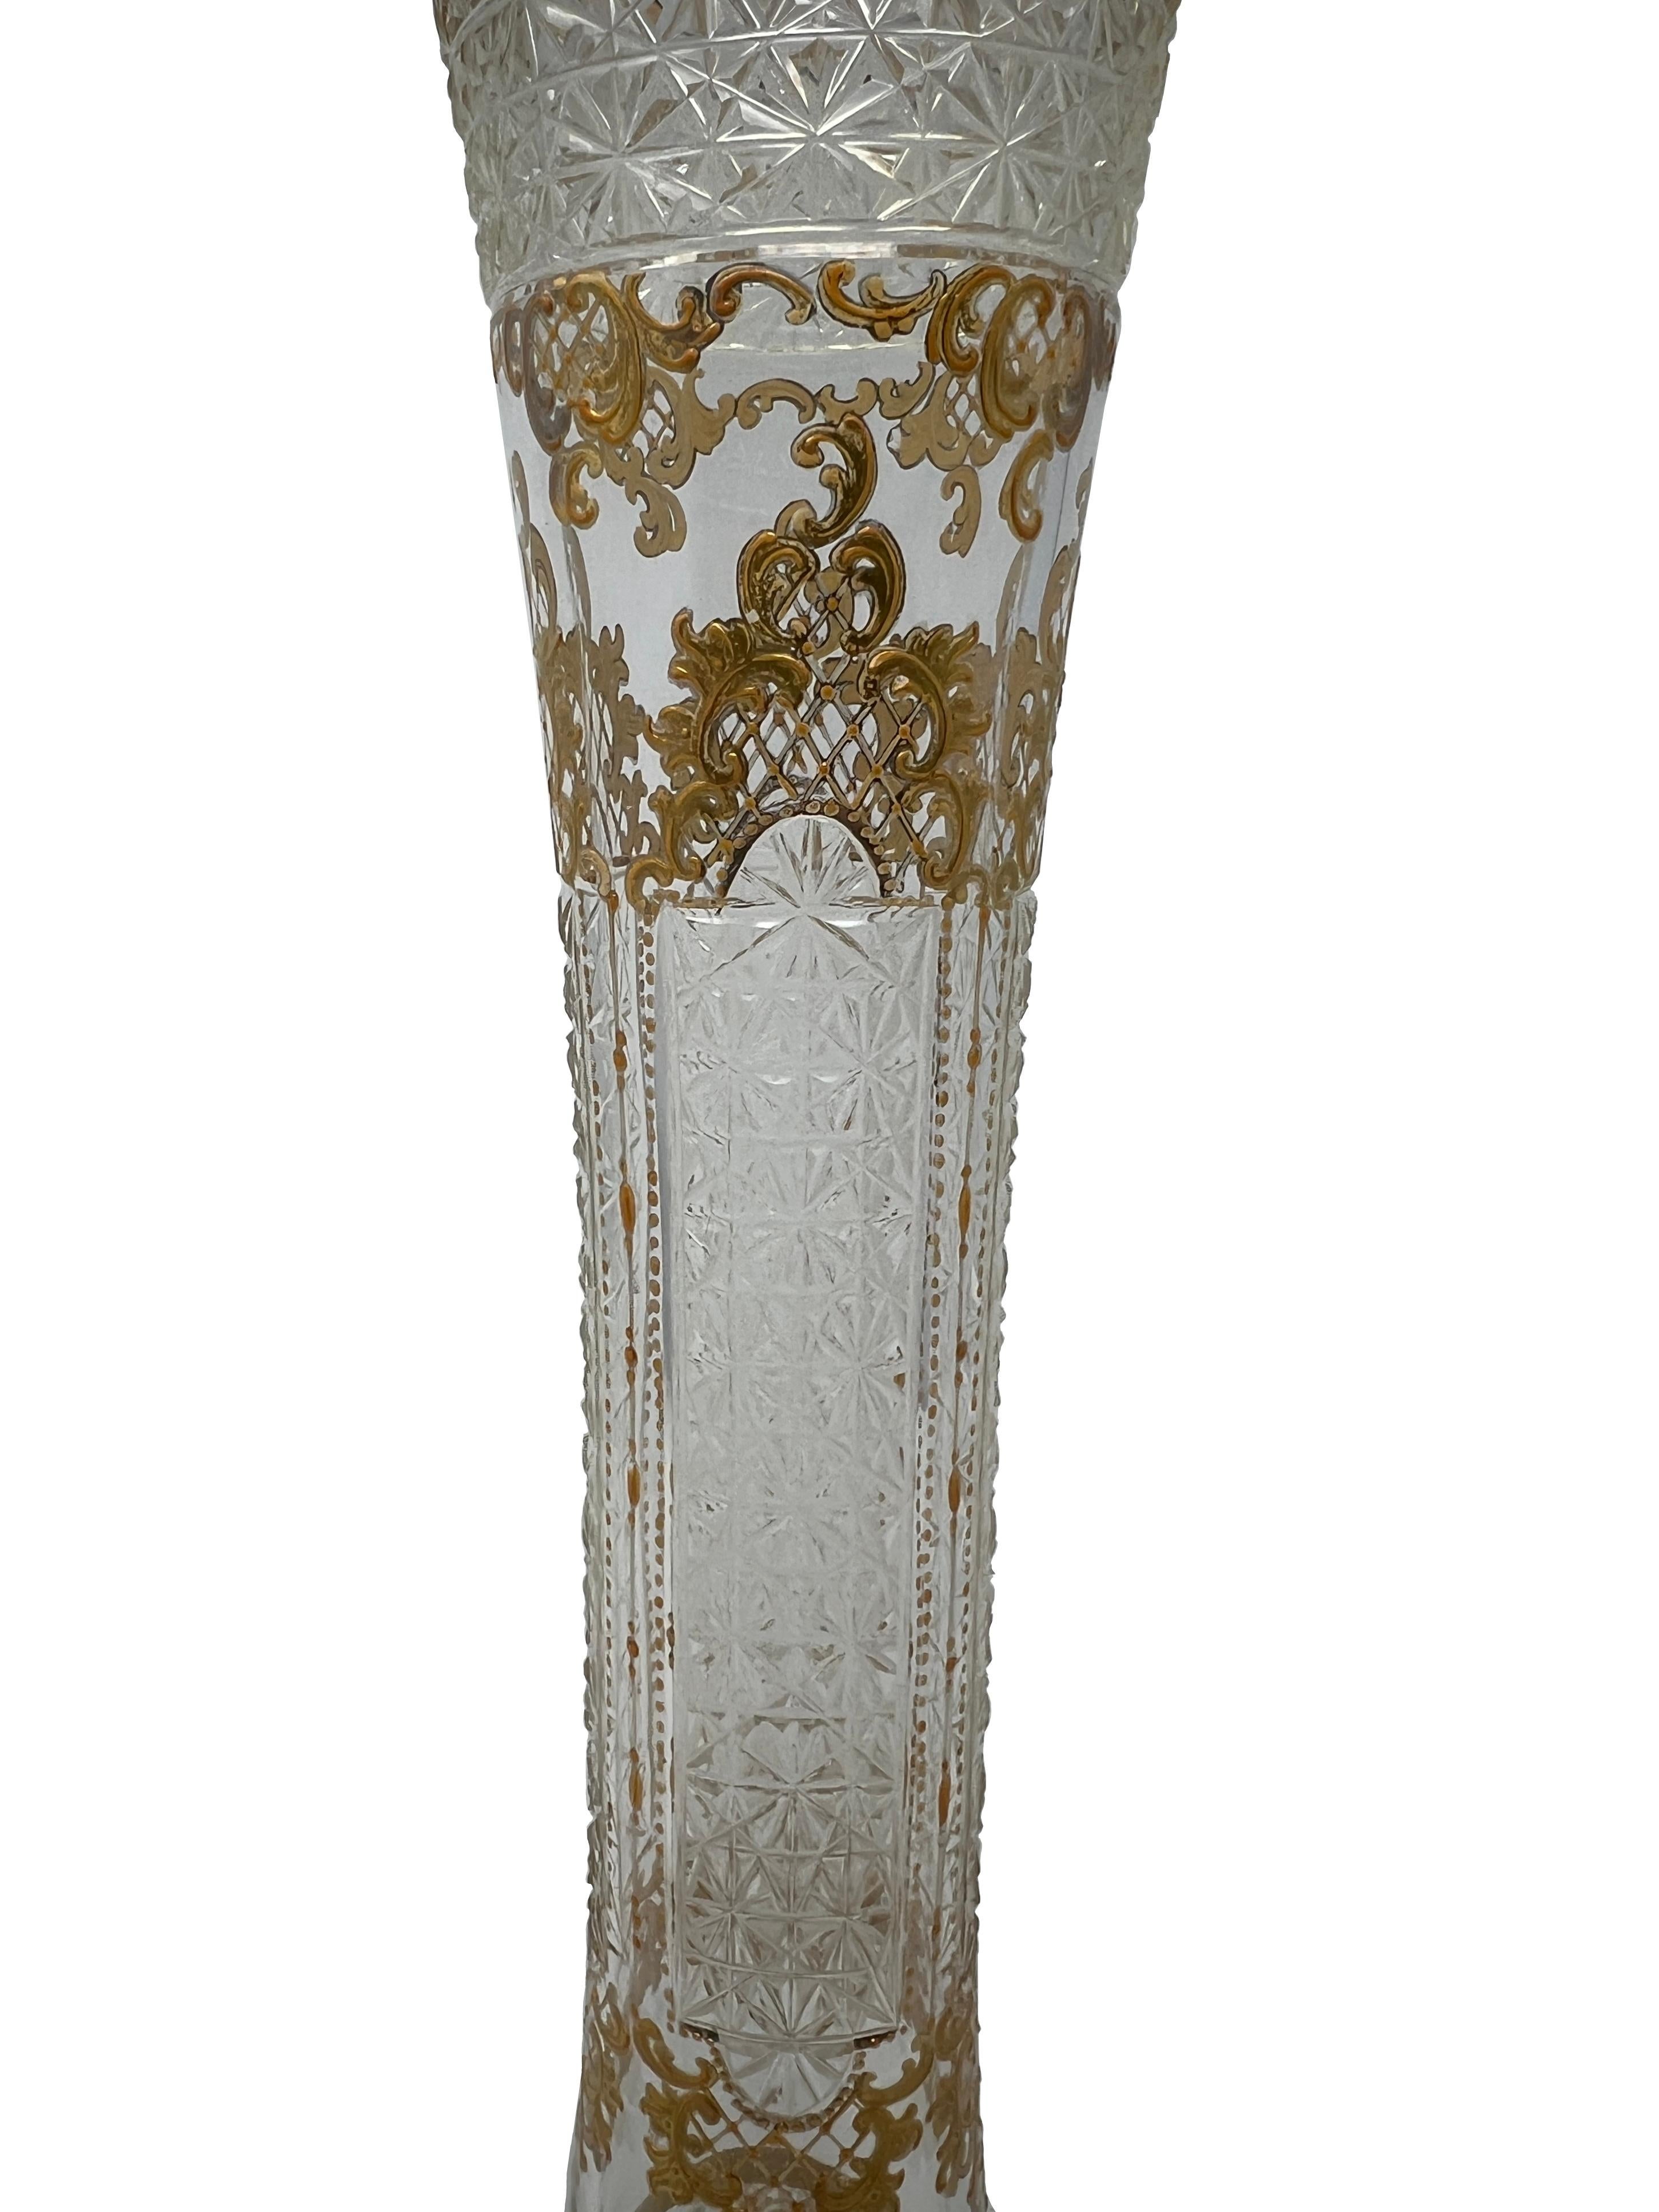 Late 19th Century Antique German Moser Cut Glass Bud Vase with Gold Leaf Details, Circa 1880's. For Sale